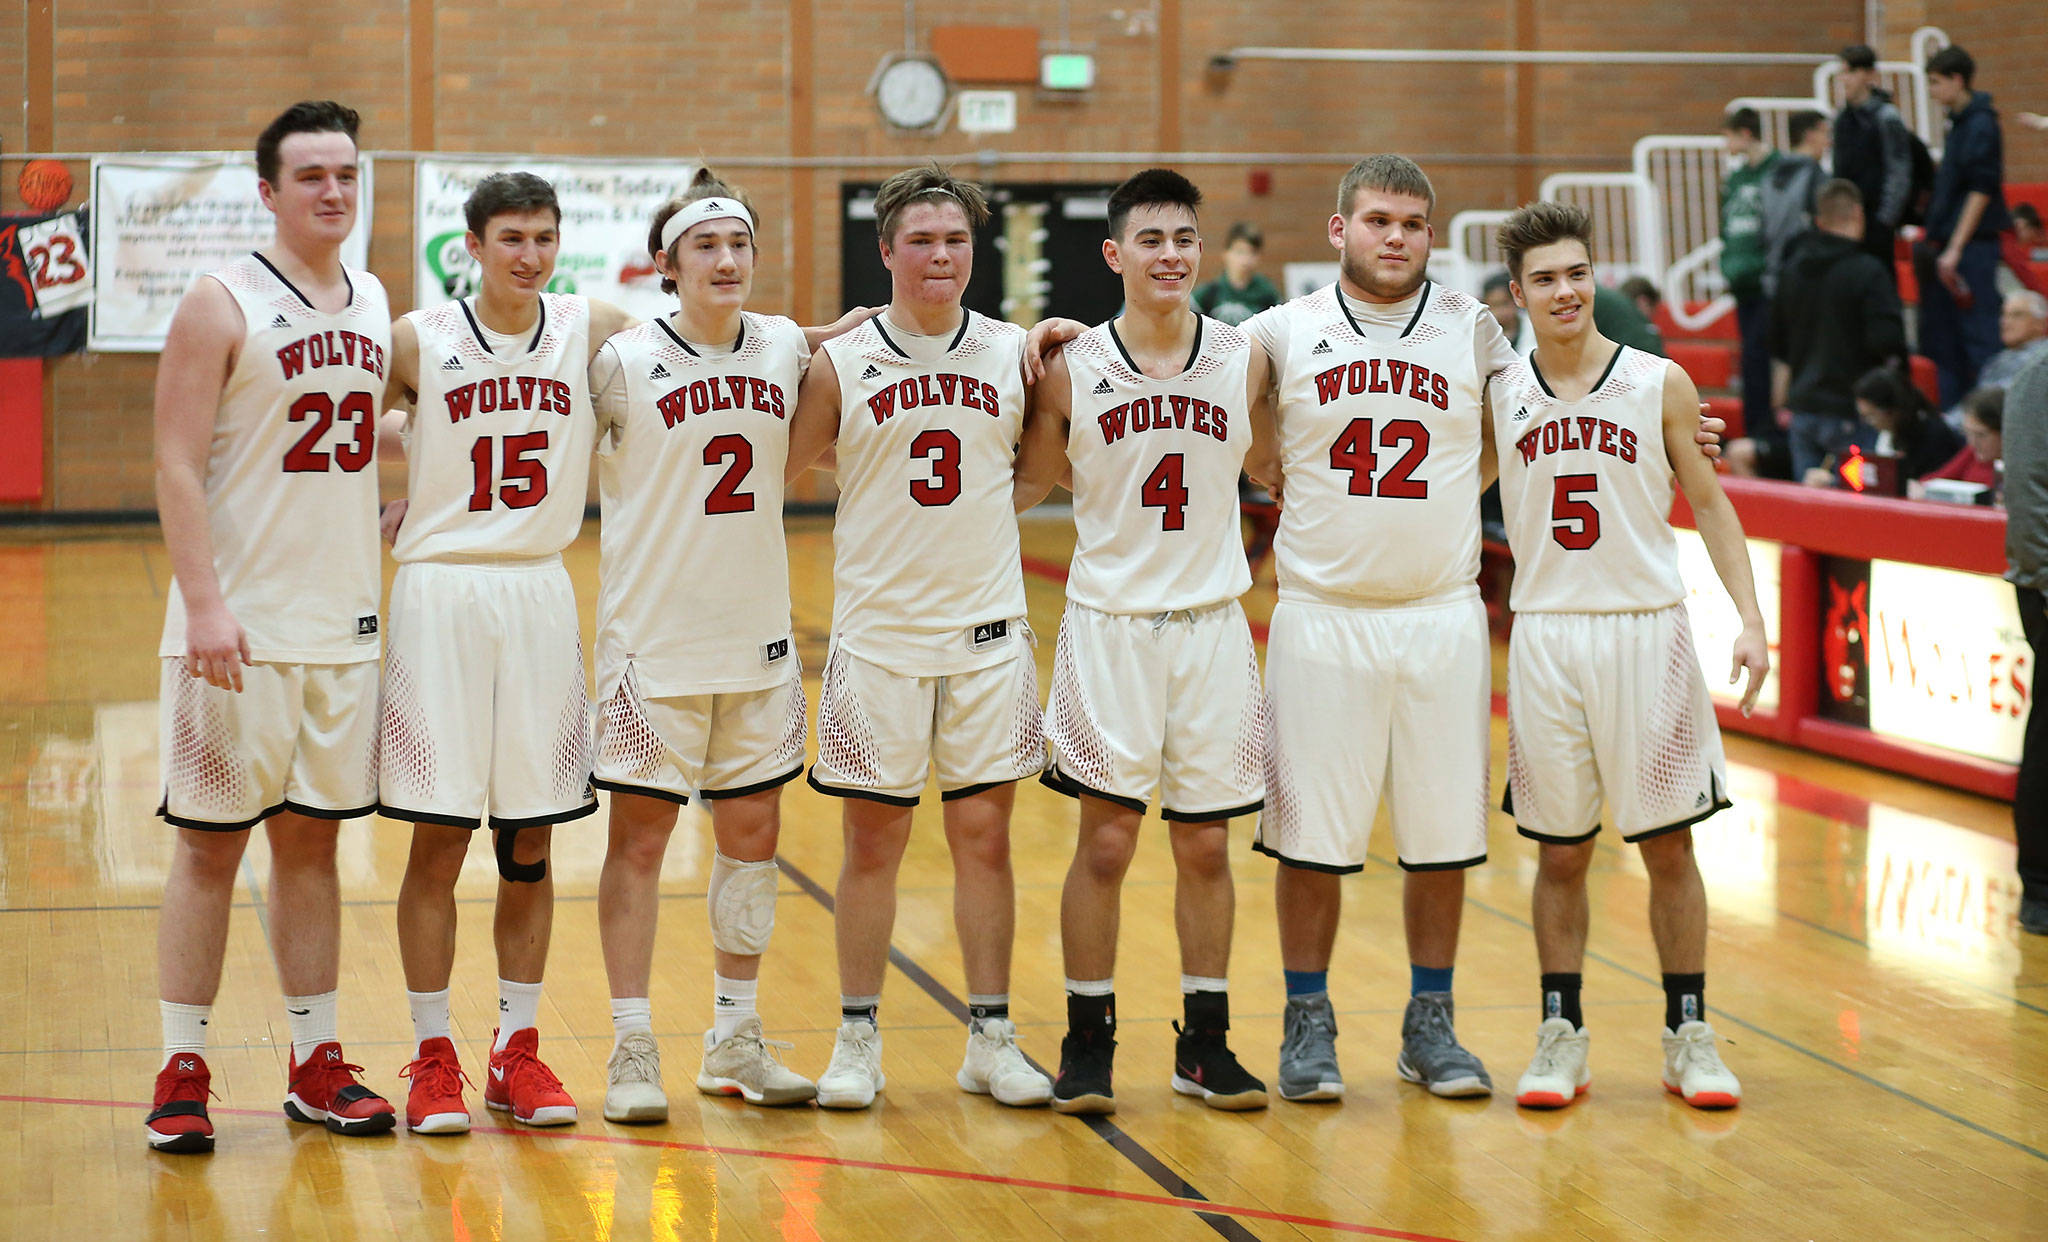 Coupeville honored its seniors Thursday. From the left are Kyle Rockwell, Joey Lippo, Ethan Spark, Hunter Downes, Hunter Smith, James Vidoni and Cameron Toomey-Stout.(Photo by John Fisken)